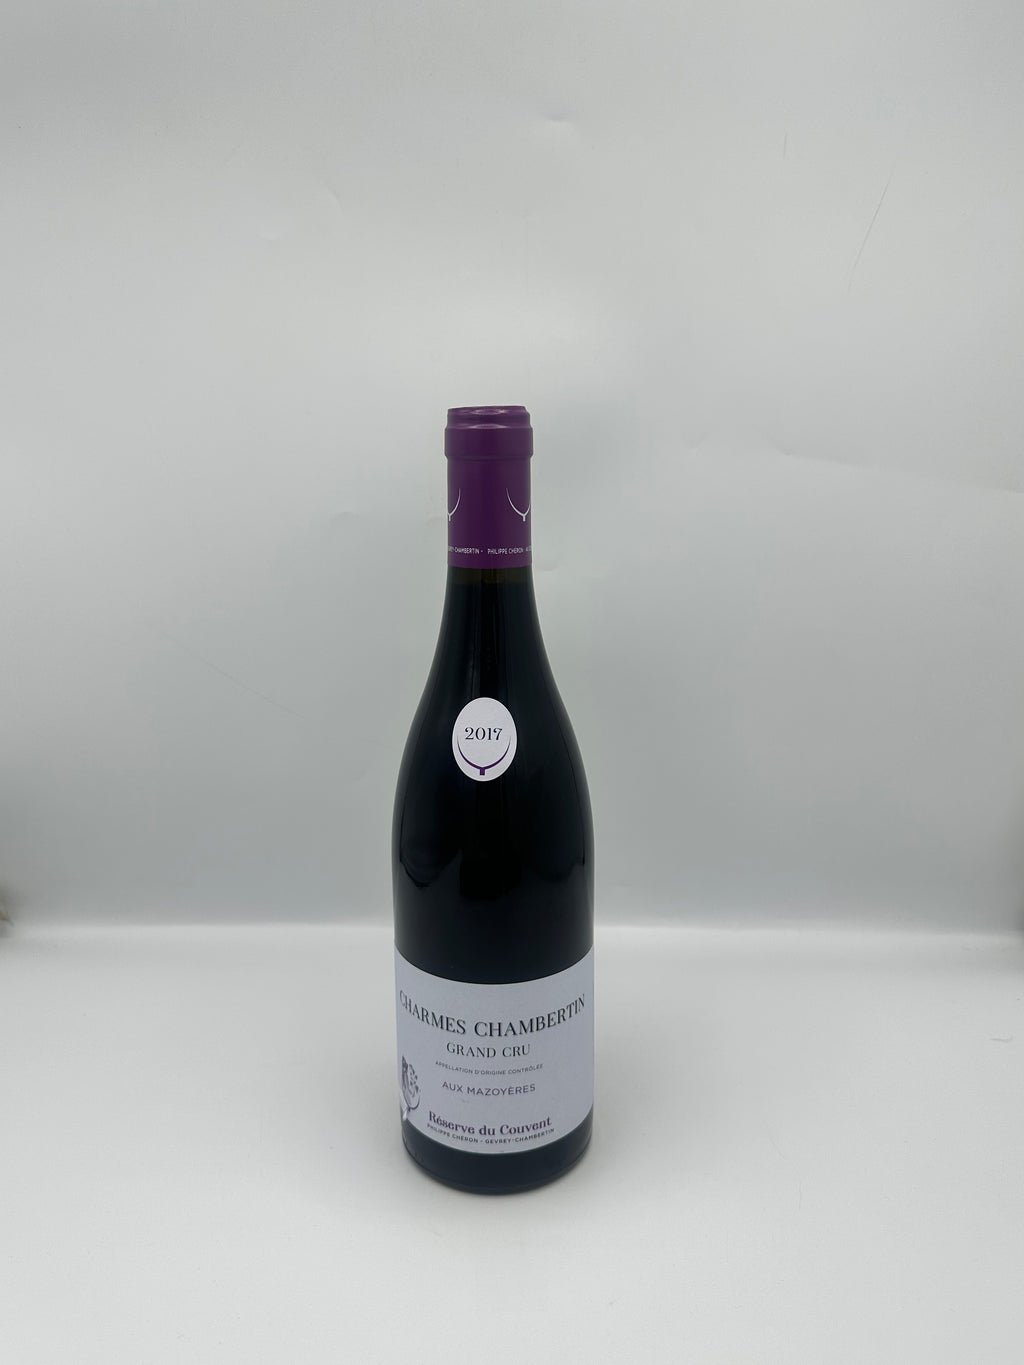 Charmes Chambertin Grand Cru “Aux Mazoyeres” 2017 Tinto - Domaine Couvent Philippe Chéron